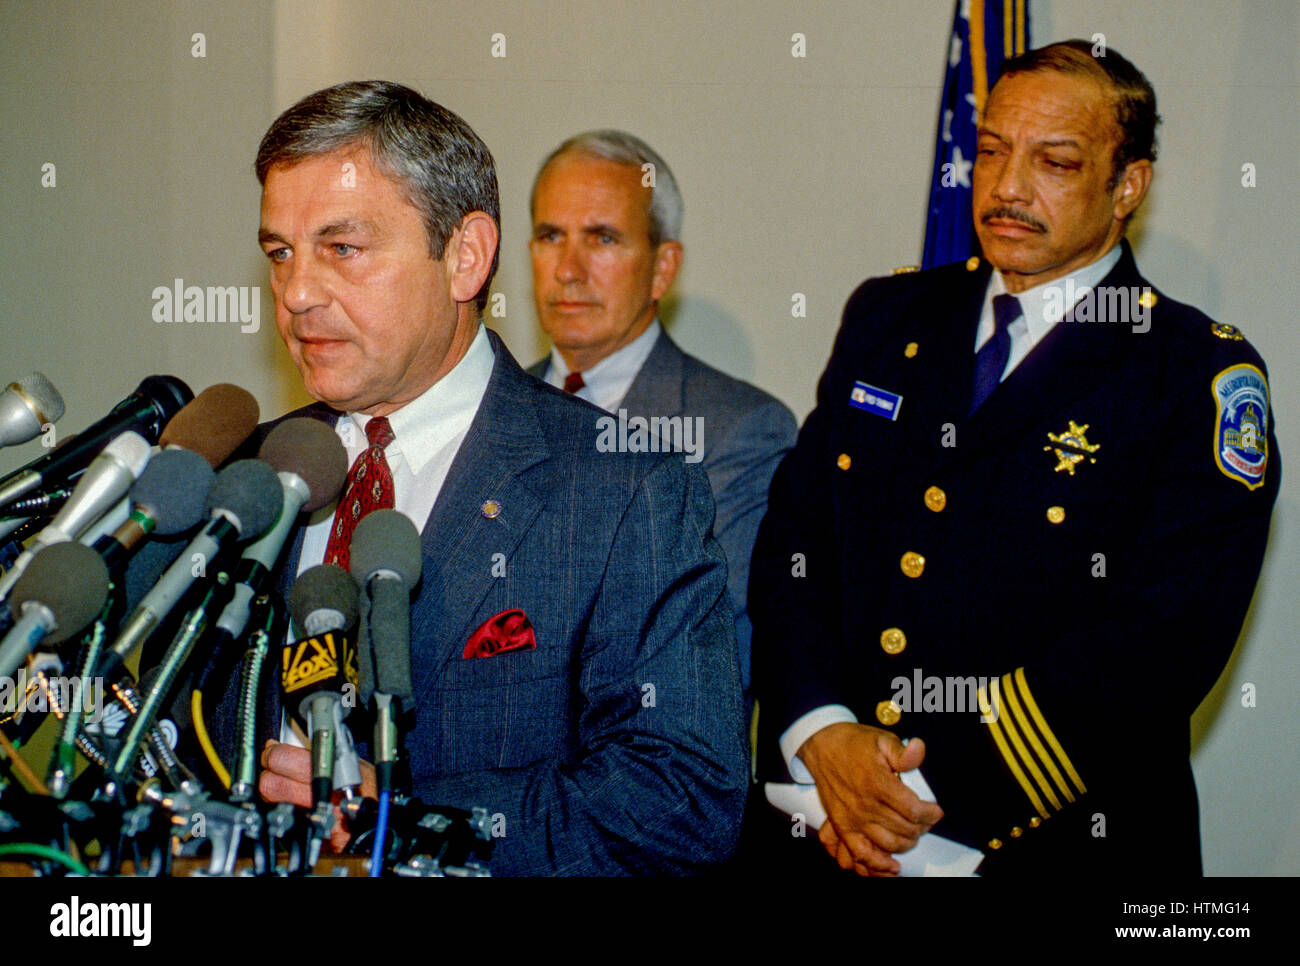 FBI Assistant Director Anthony Daniels answers reporters questions during a news conference held at the FBI's Washington DC field office late in the evening to describe the events earlier in the day when 2 FBI agents and a police officer were killed in DC police headquarters, DC Police Chief Fred Thomas stands behind Daniels Washington DC., November 22, 1994. Photo By Mark Reinstein Stock Photo